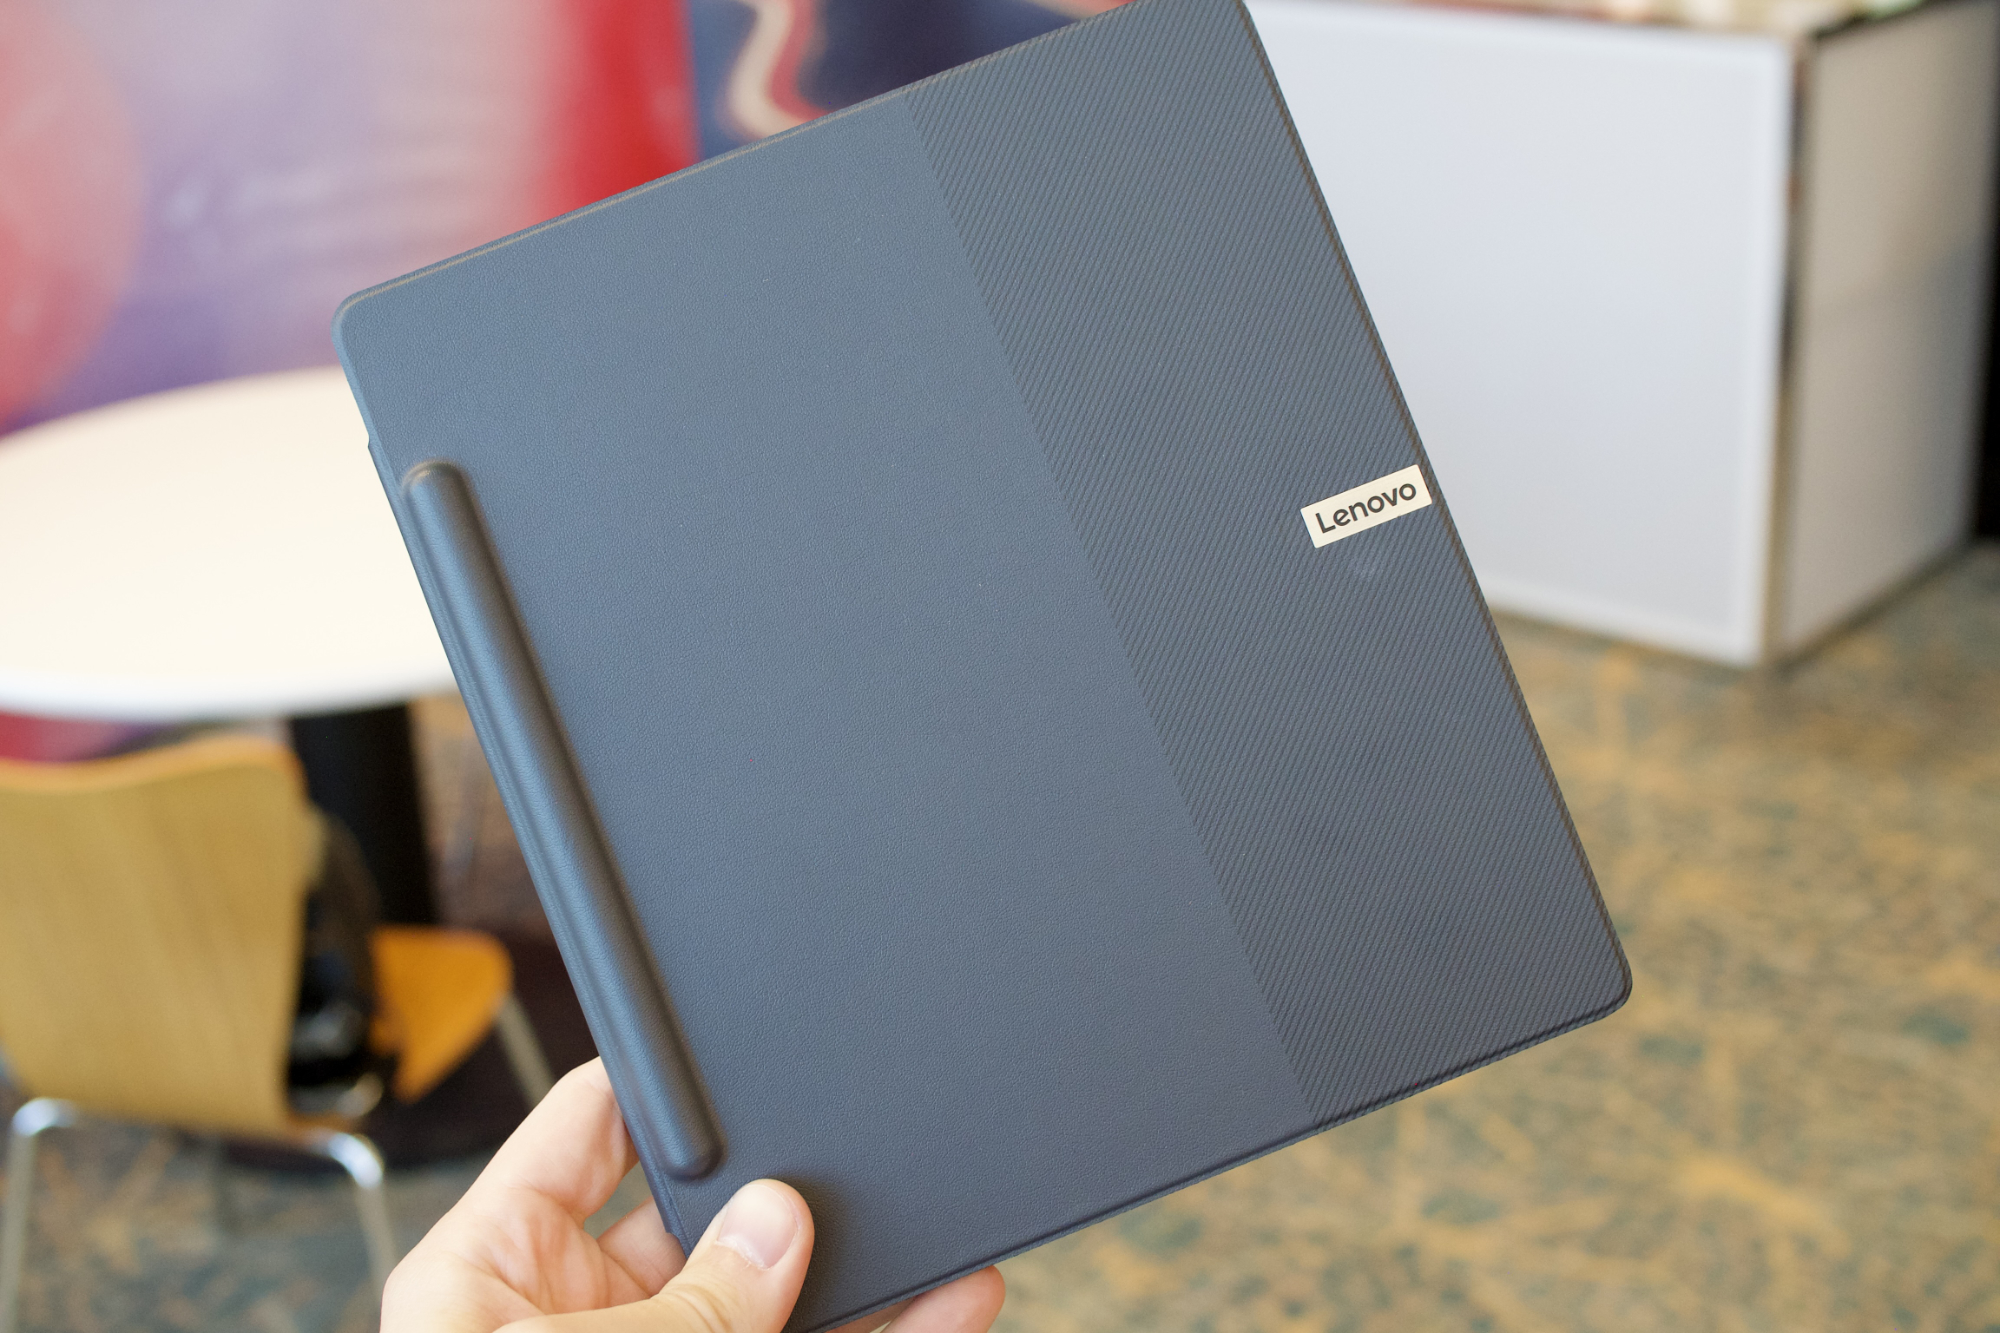 Lenovo Smart Paper now available in the UK and the Netherlands - Good  e-Reader